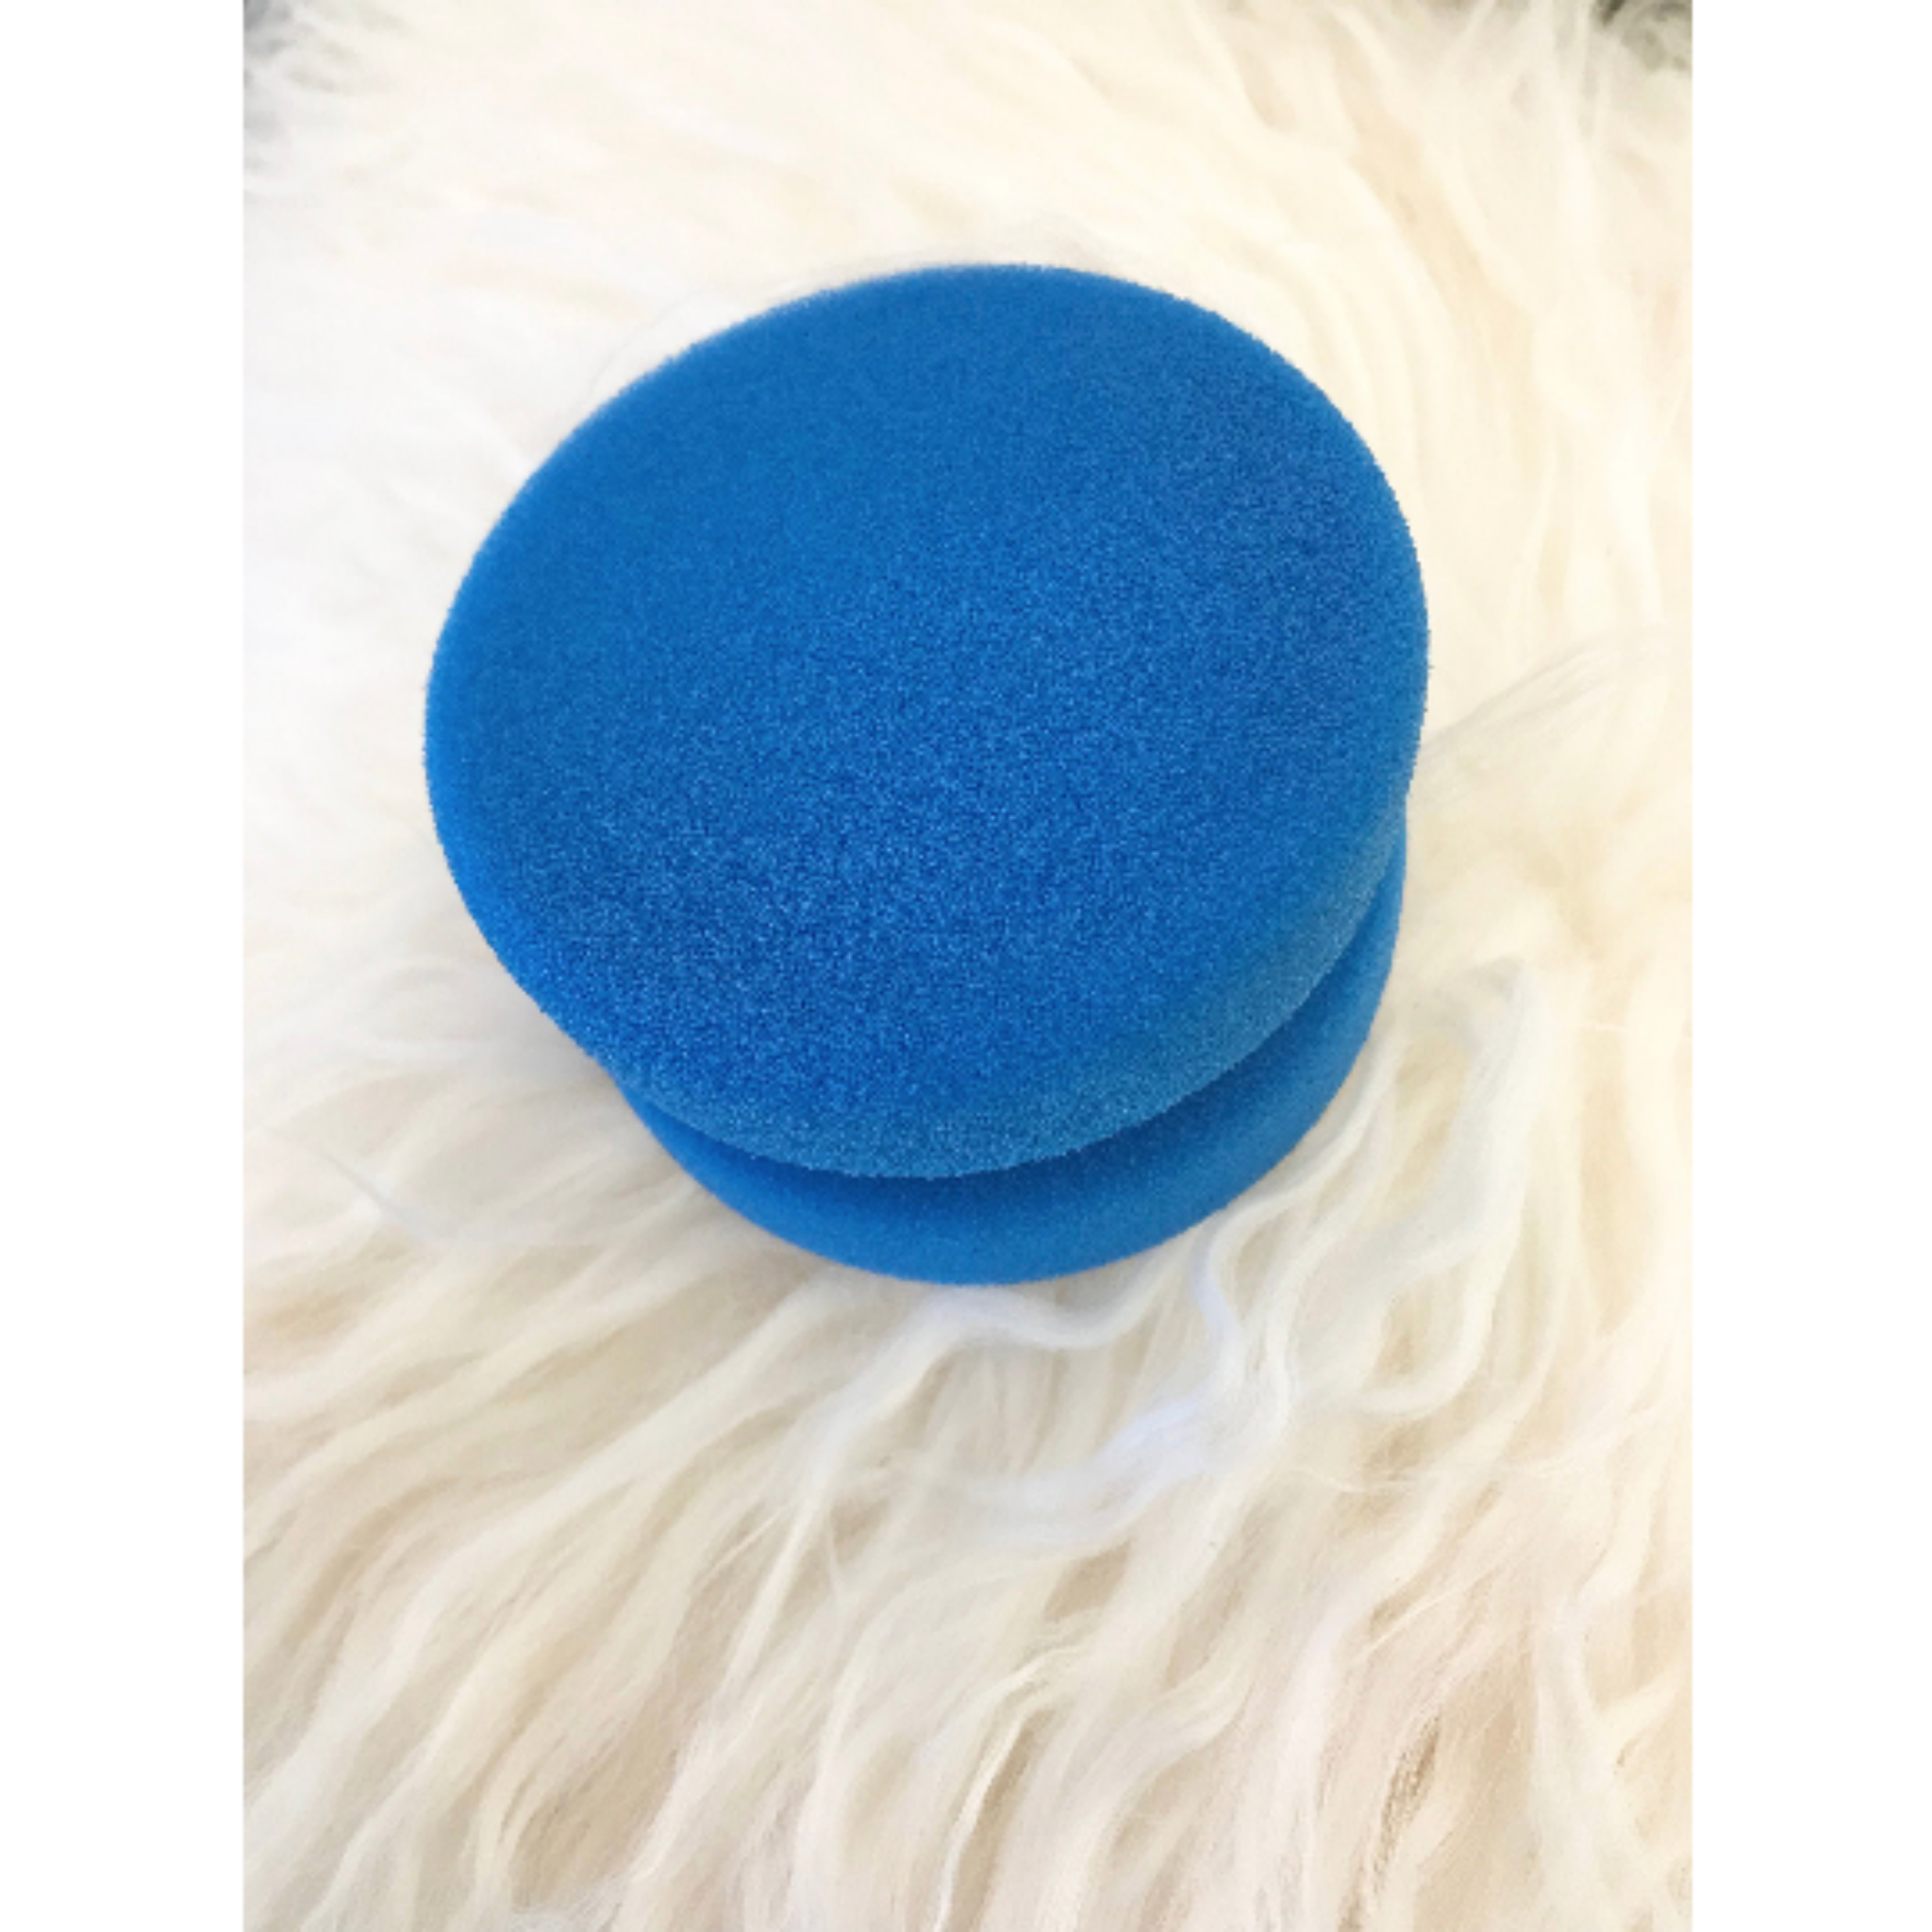 Dixie Belle Paint's Blue Sponge Applicator is against a white faux fur background. White borders are on the sides.